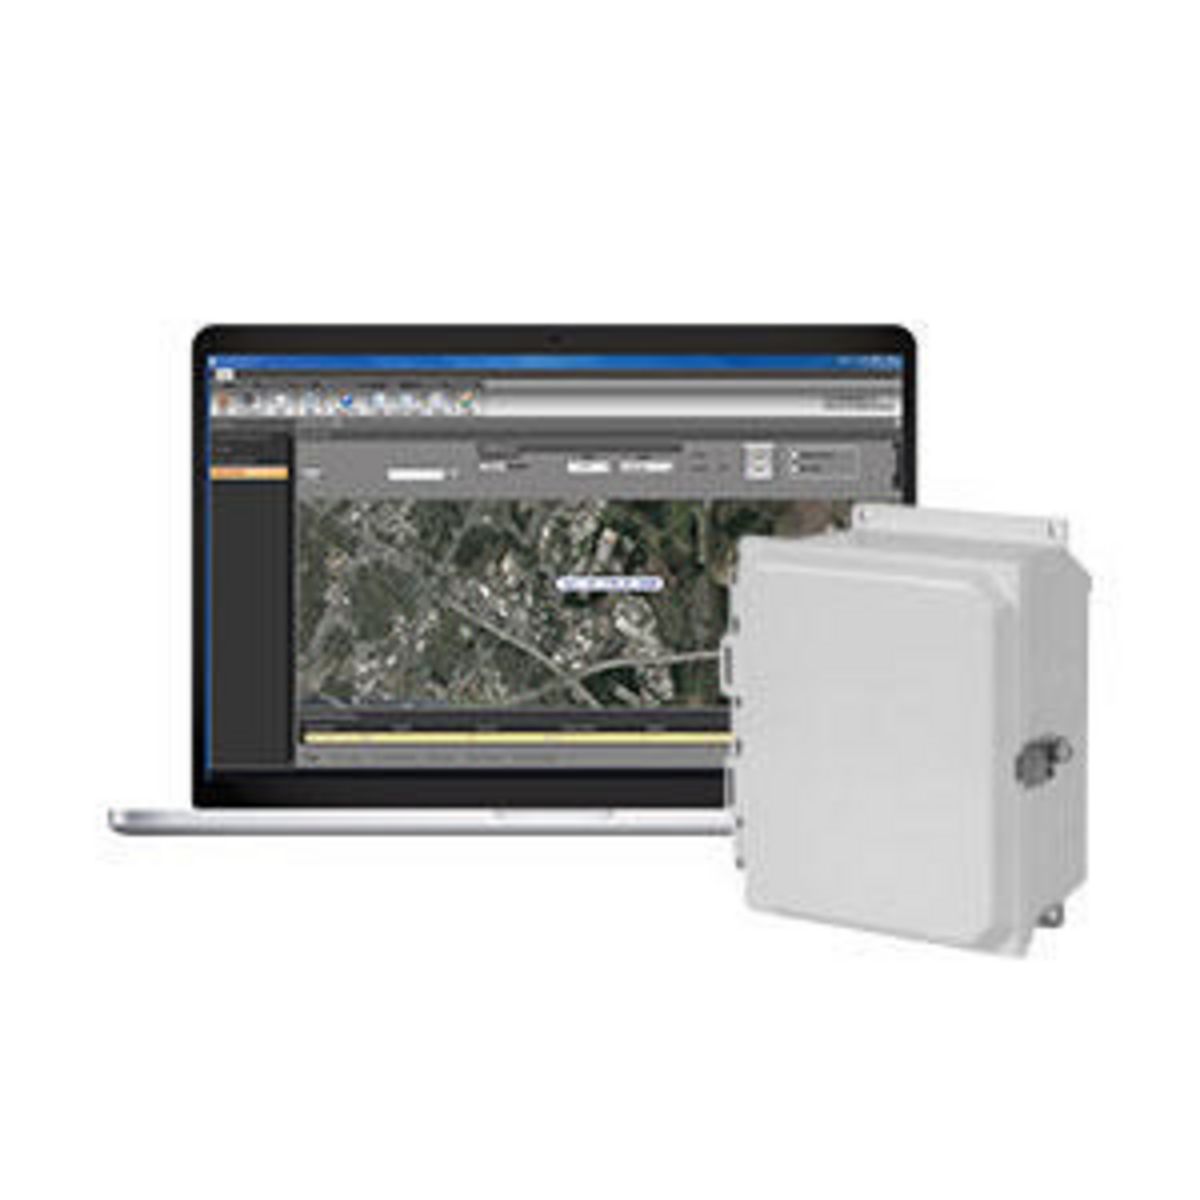 wiSCAPE® Wireless Outdoor Lighting System | Hubbell Control Solutions